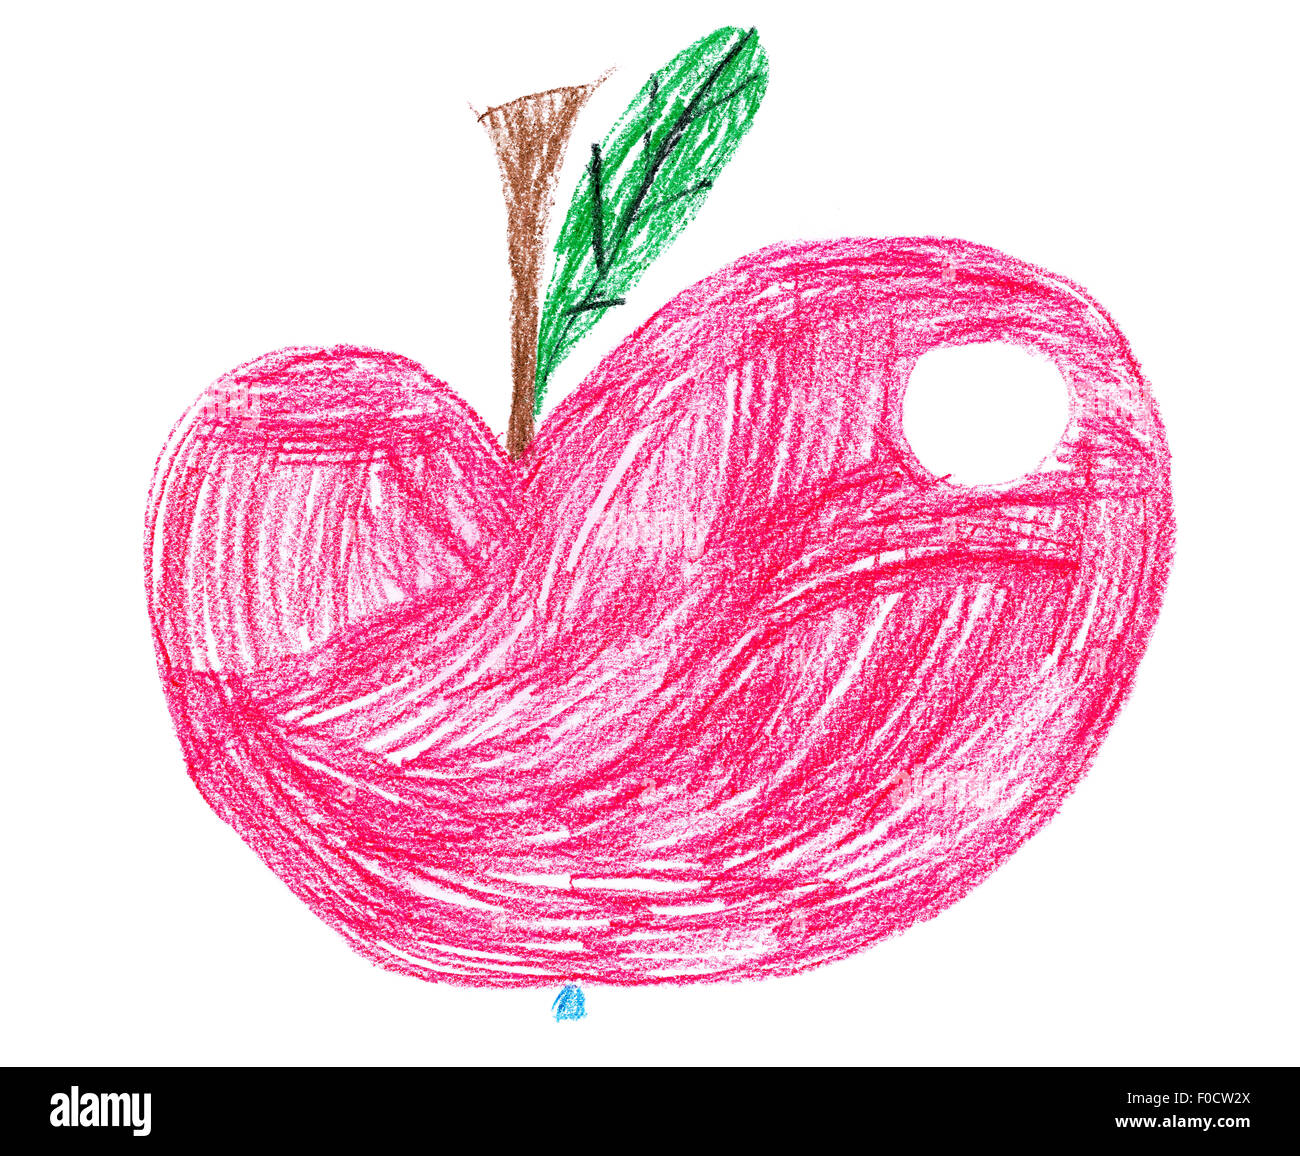 red apple. children pencil drawing Stock Photo